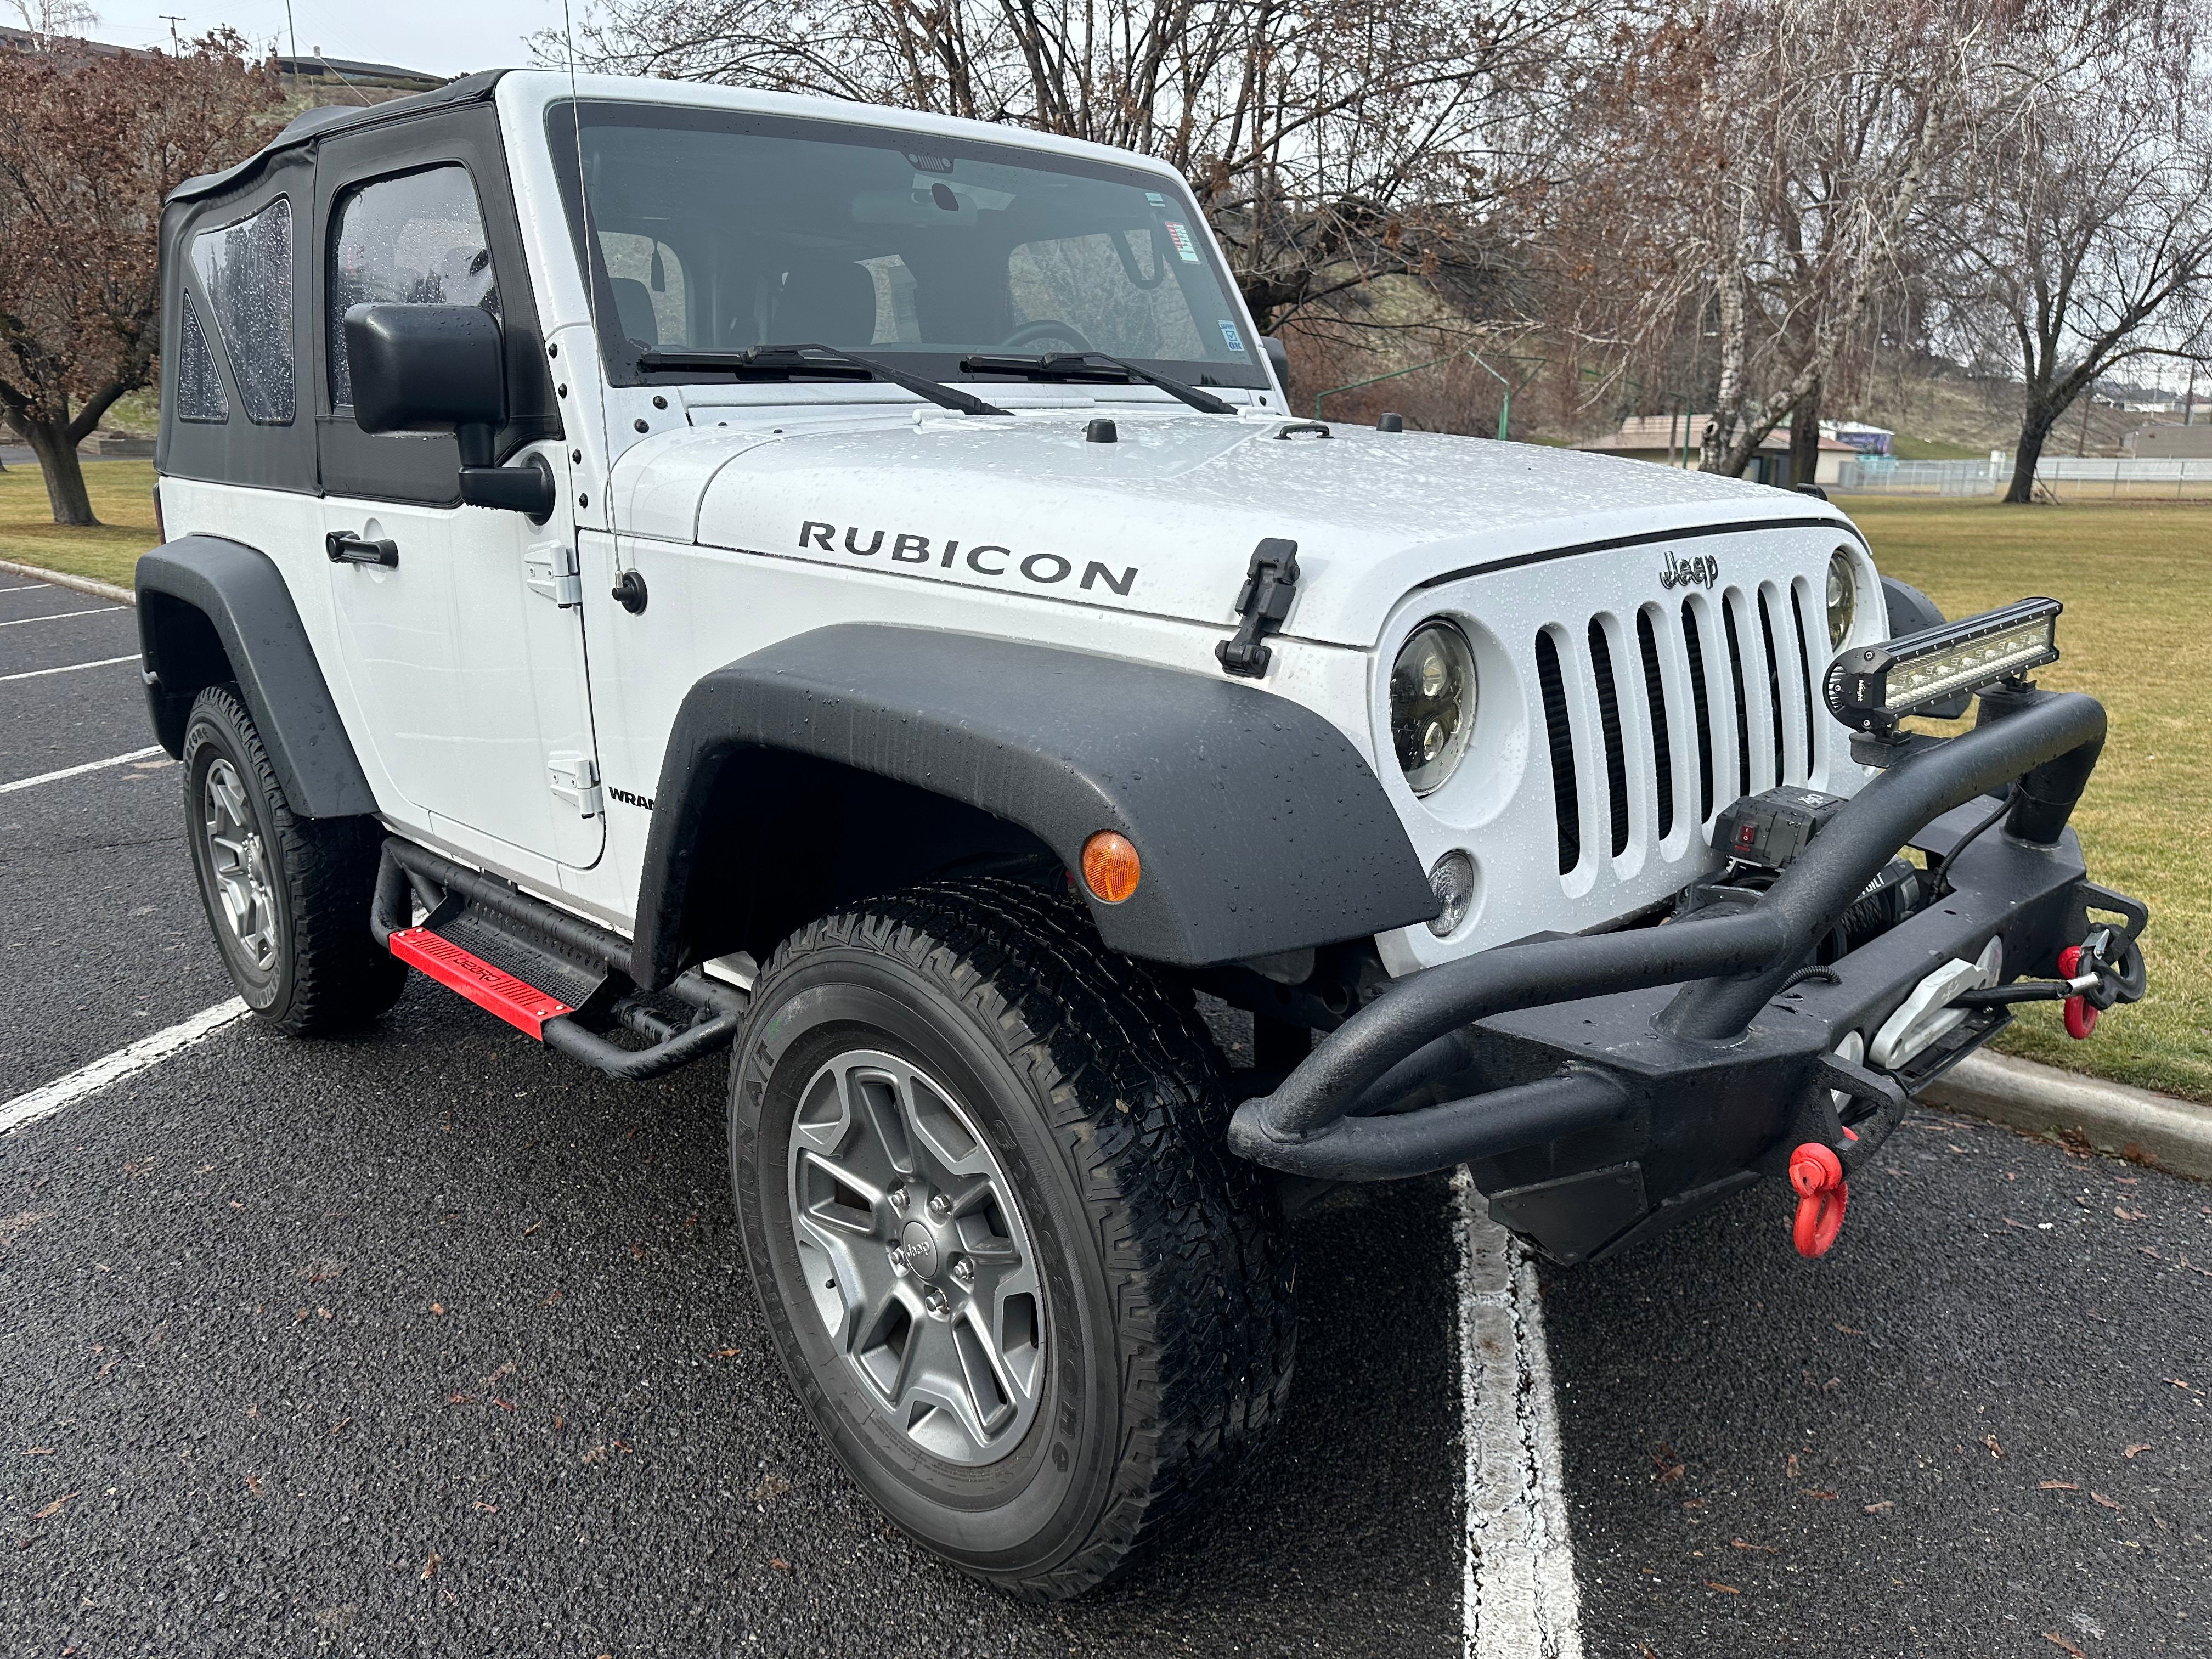 Used Jeep Wrangler Rubicon for Sale Right Now - Autotrader